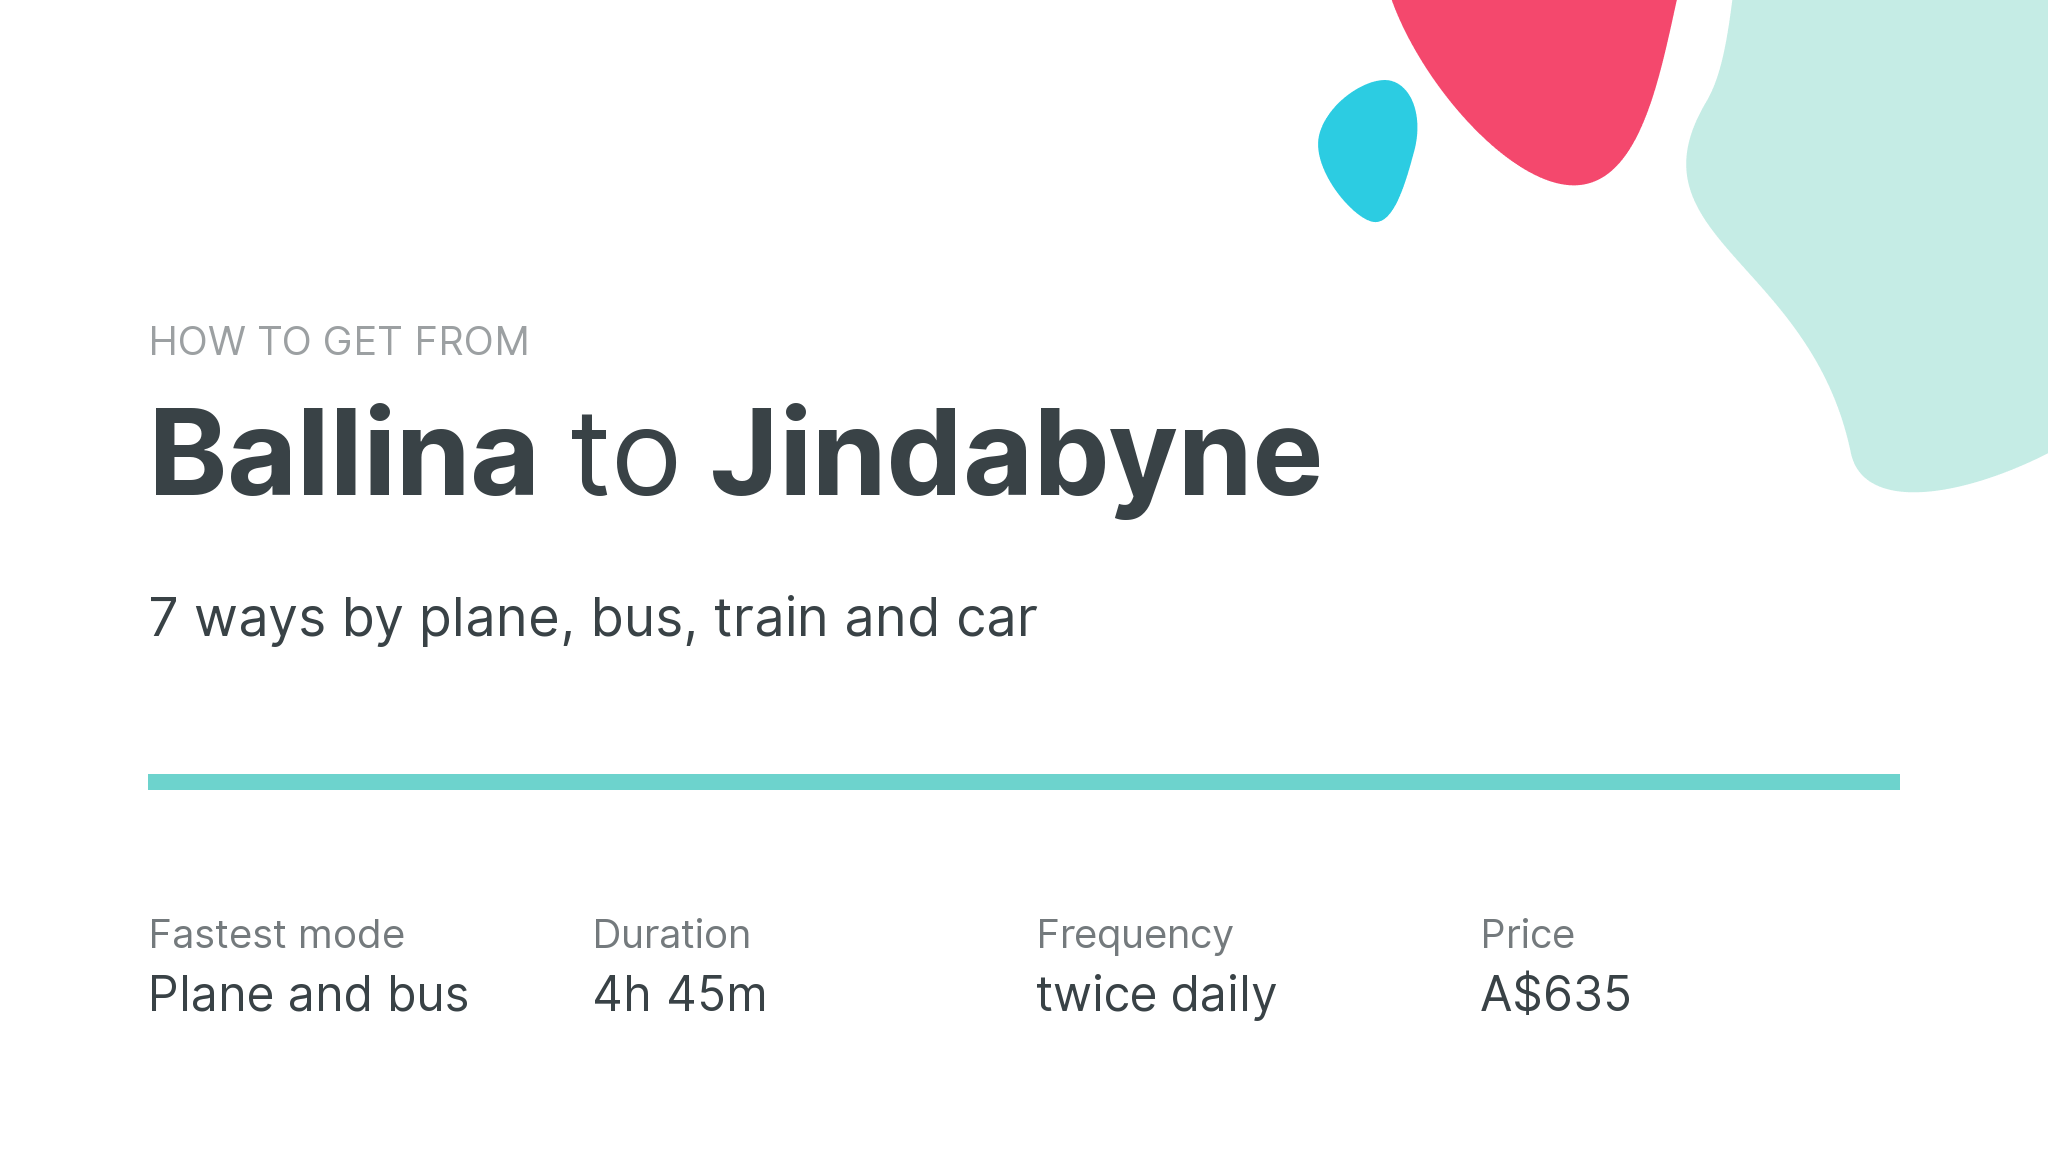 How do I get from Ballina to Jindabyne